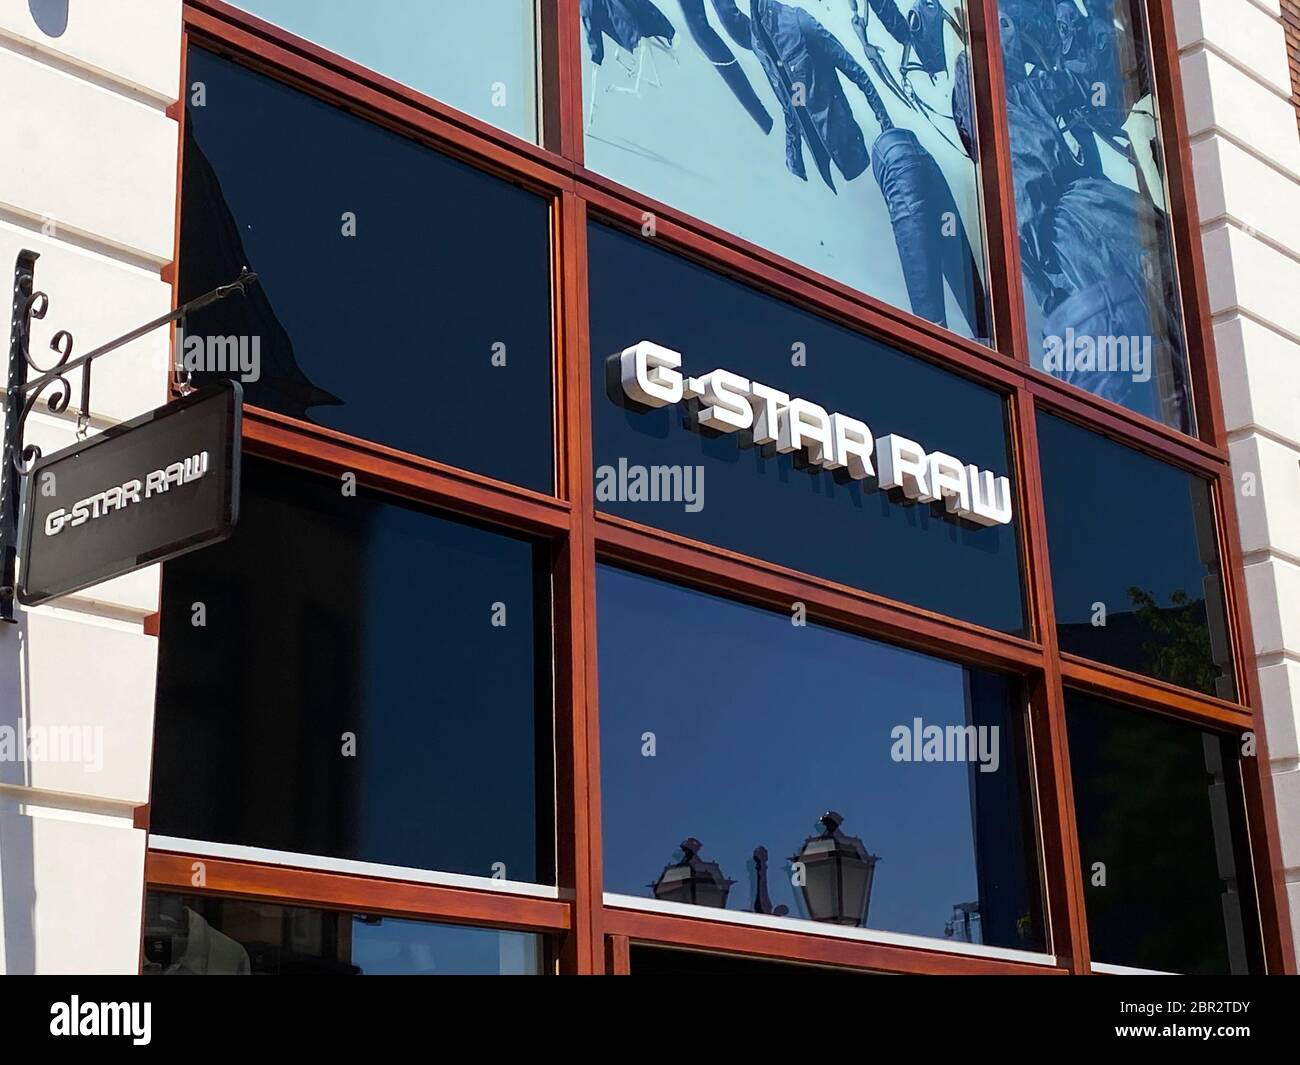 Roermond, Netherlands - May 19. 2020: View on facade with logo lettering of  G-Star Raw company at shop entrance Stock Photo - Alamy